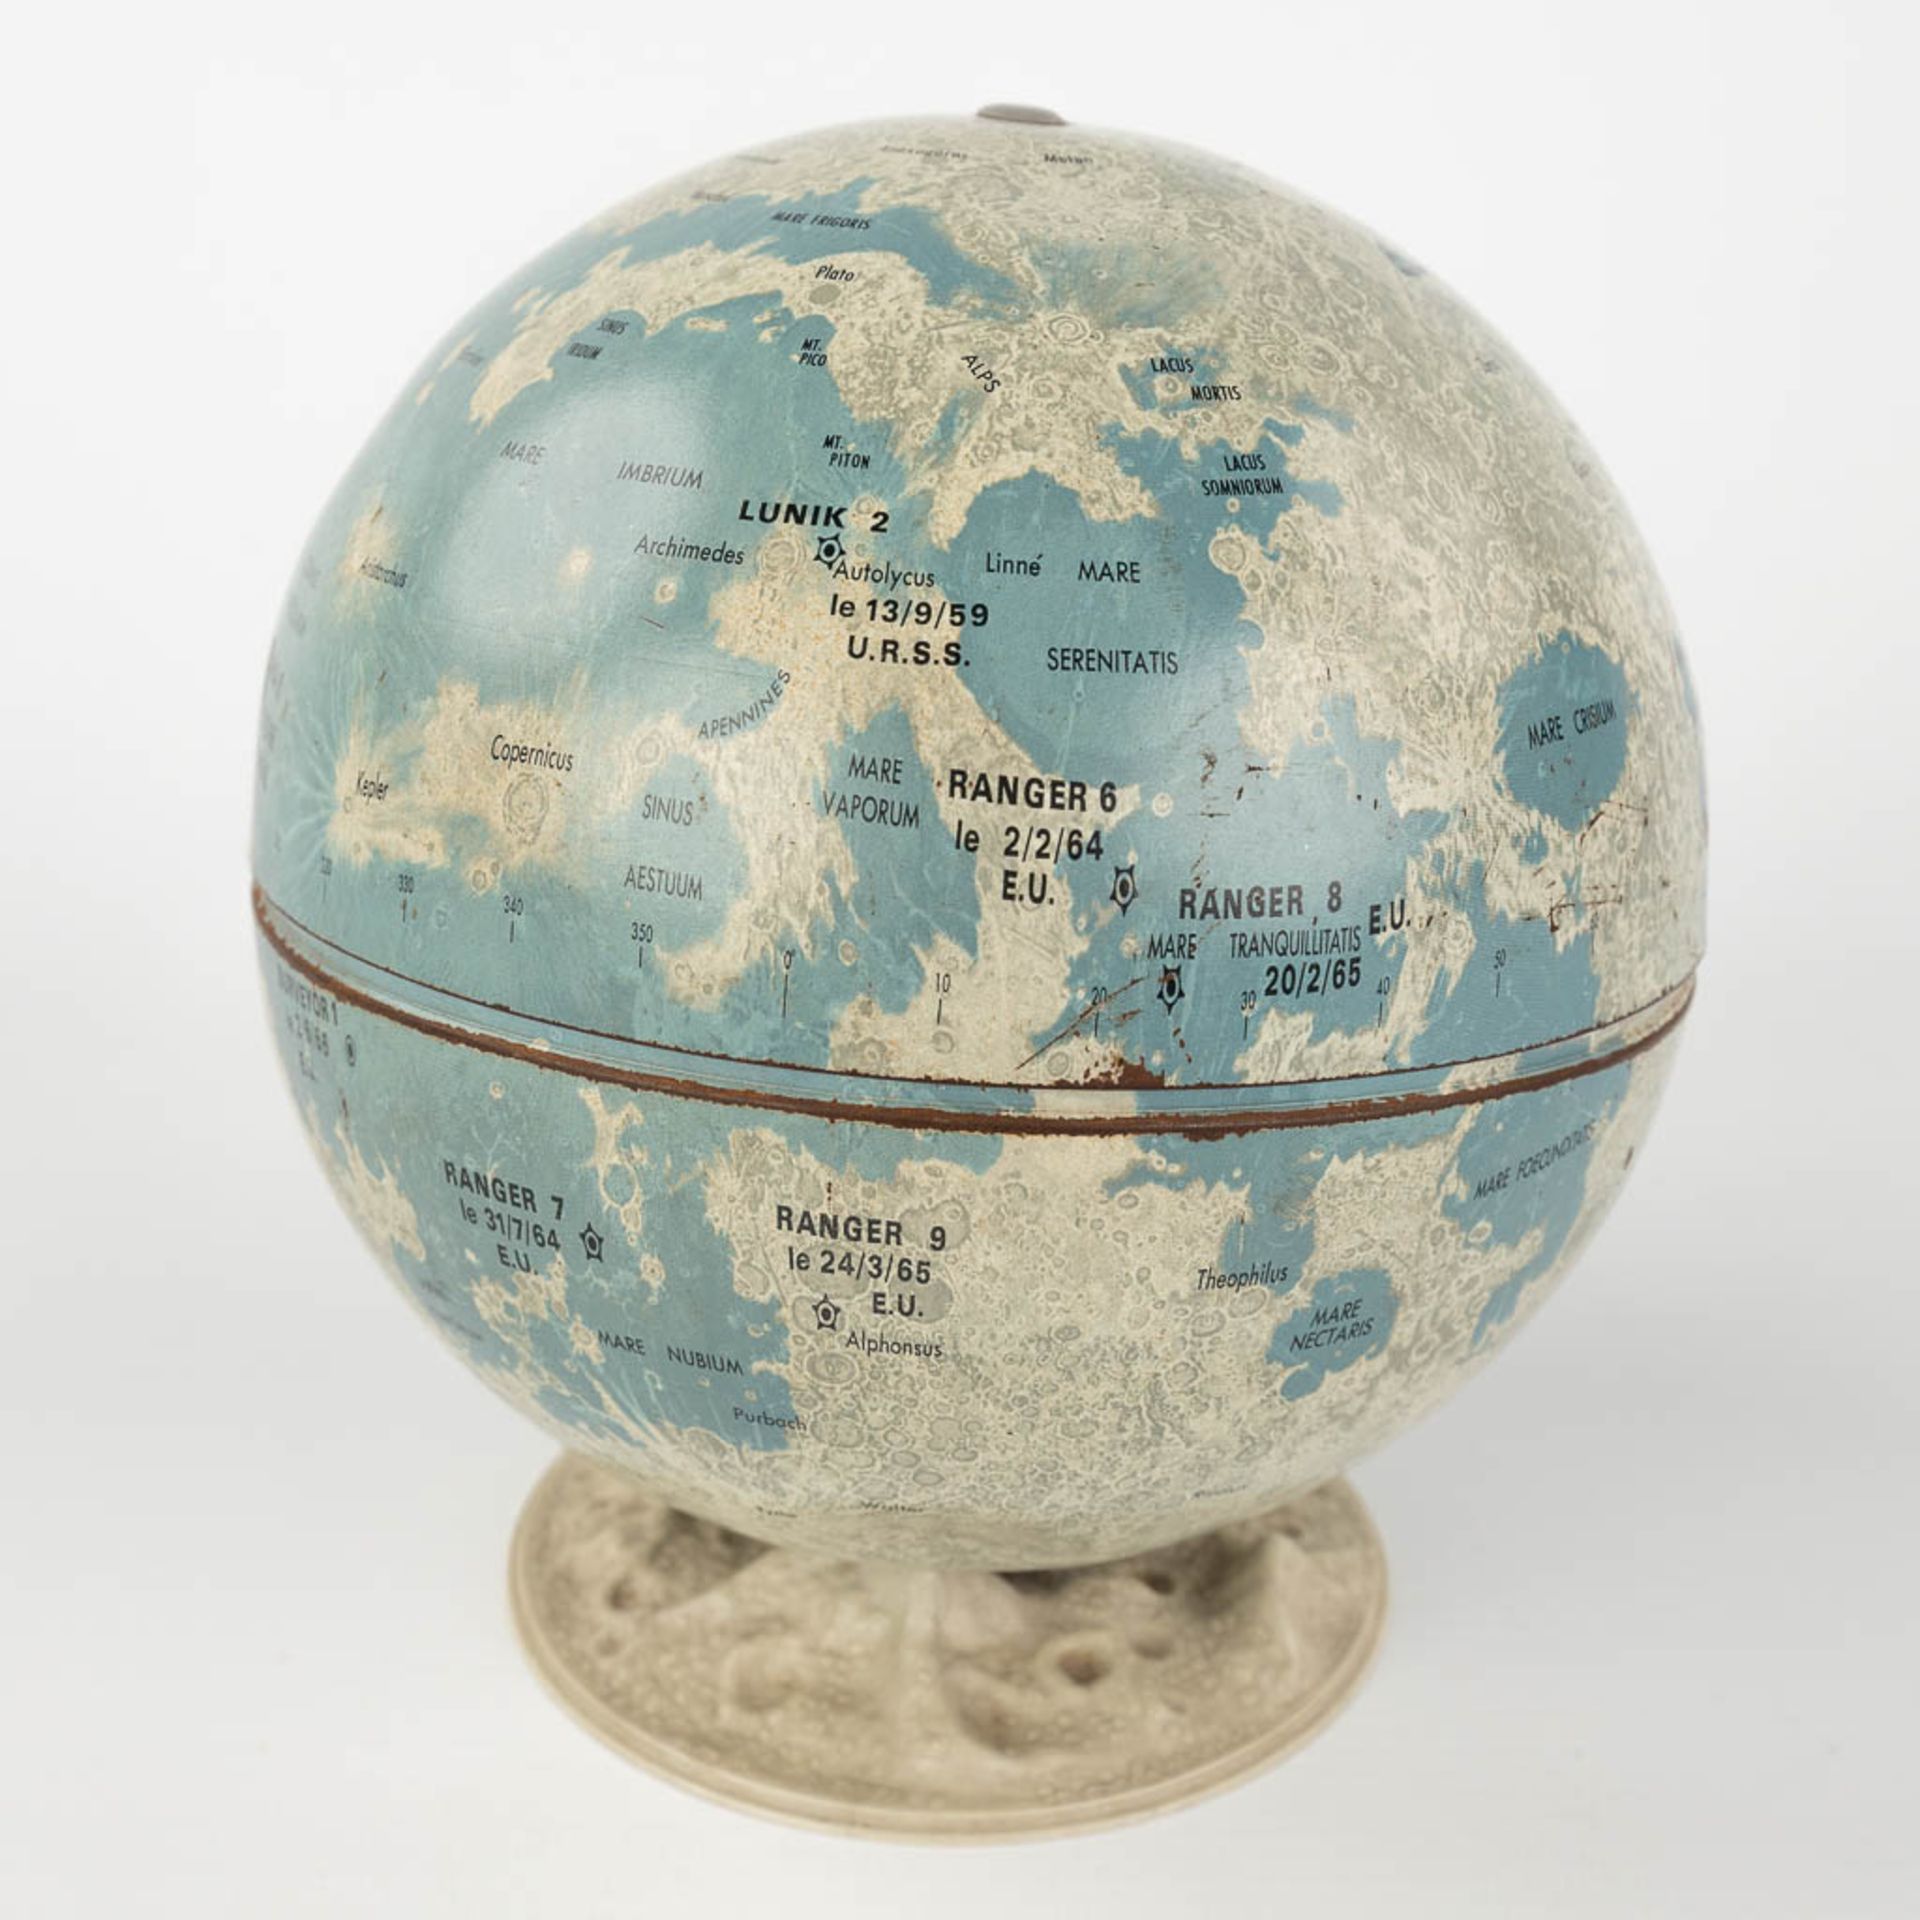 The earth and the moon, a set of 2 globes, circa 1960. (H: 42 x D: 30 cm) - Image 15 of 18